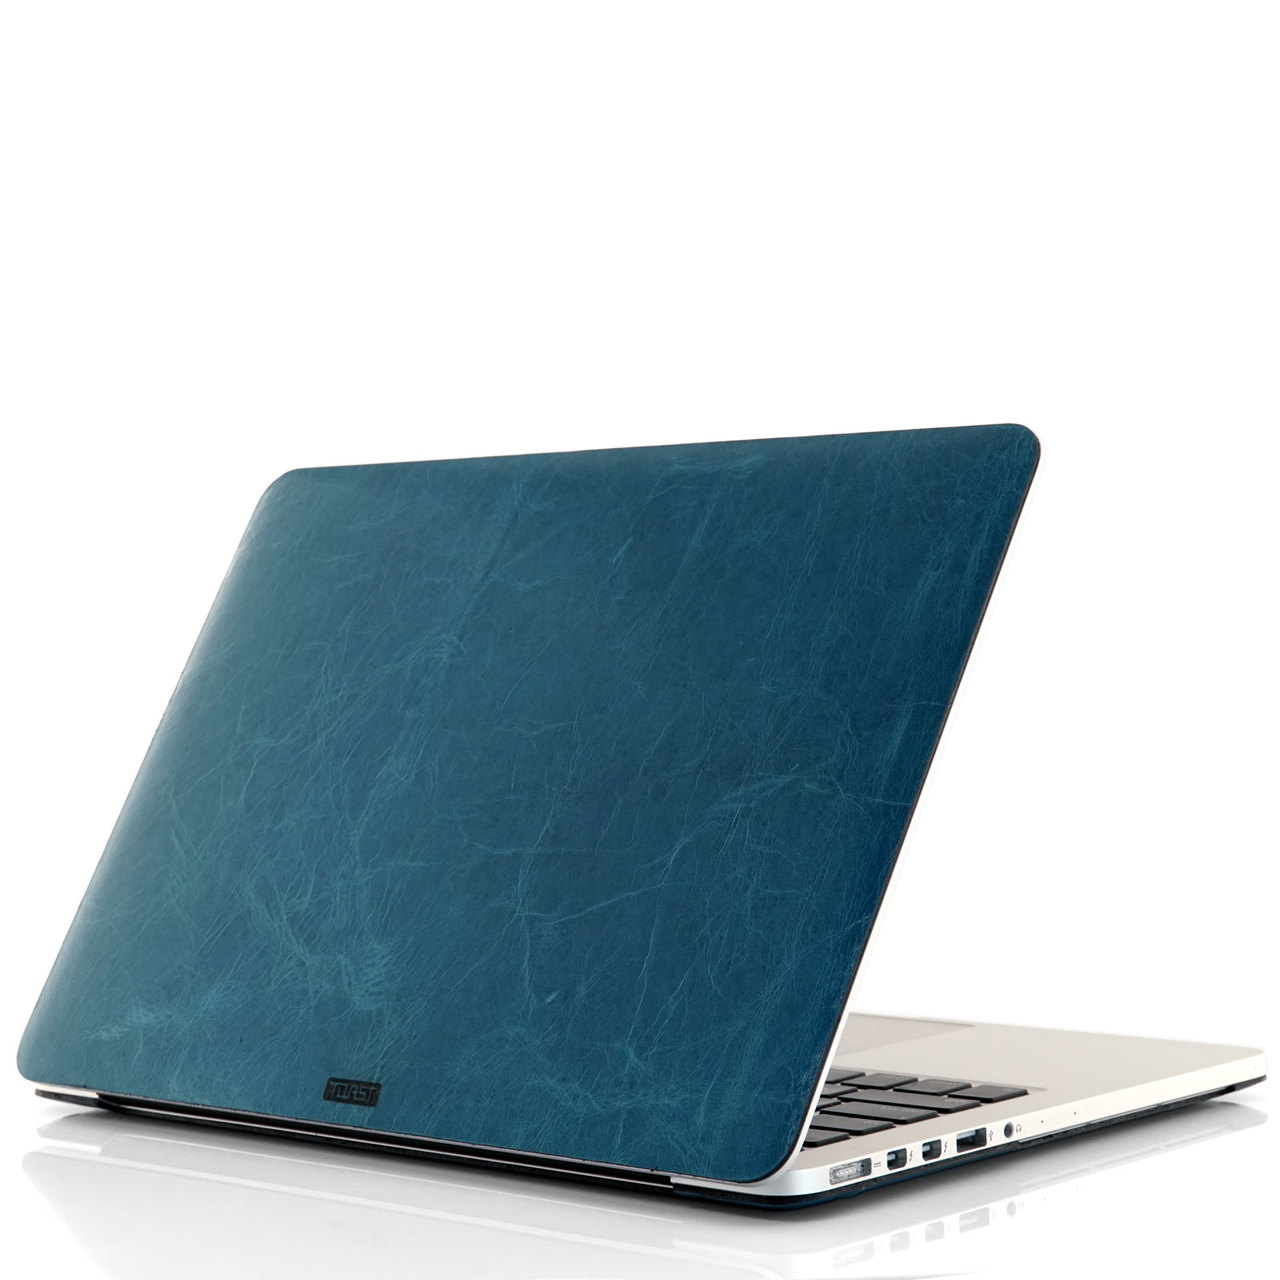 Transparent Skin for MacBook Air 15, Protective Clear Skin for MacBook Pro,  Anti Scratch Skin, Laptop Top and Bottom Cover 